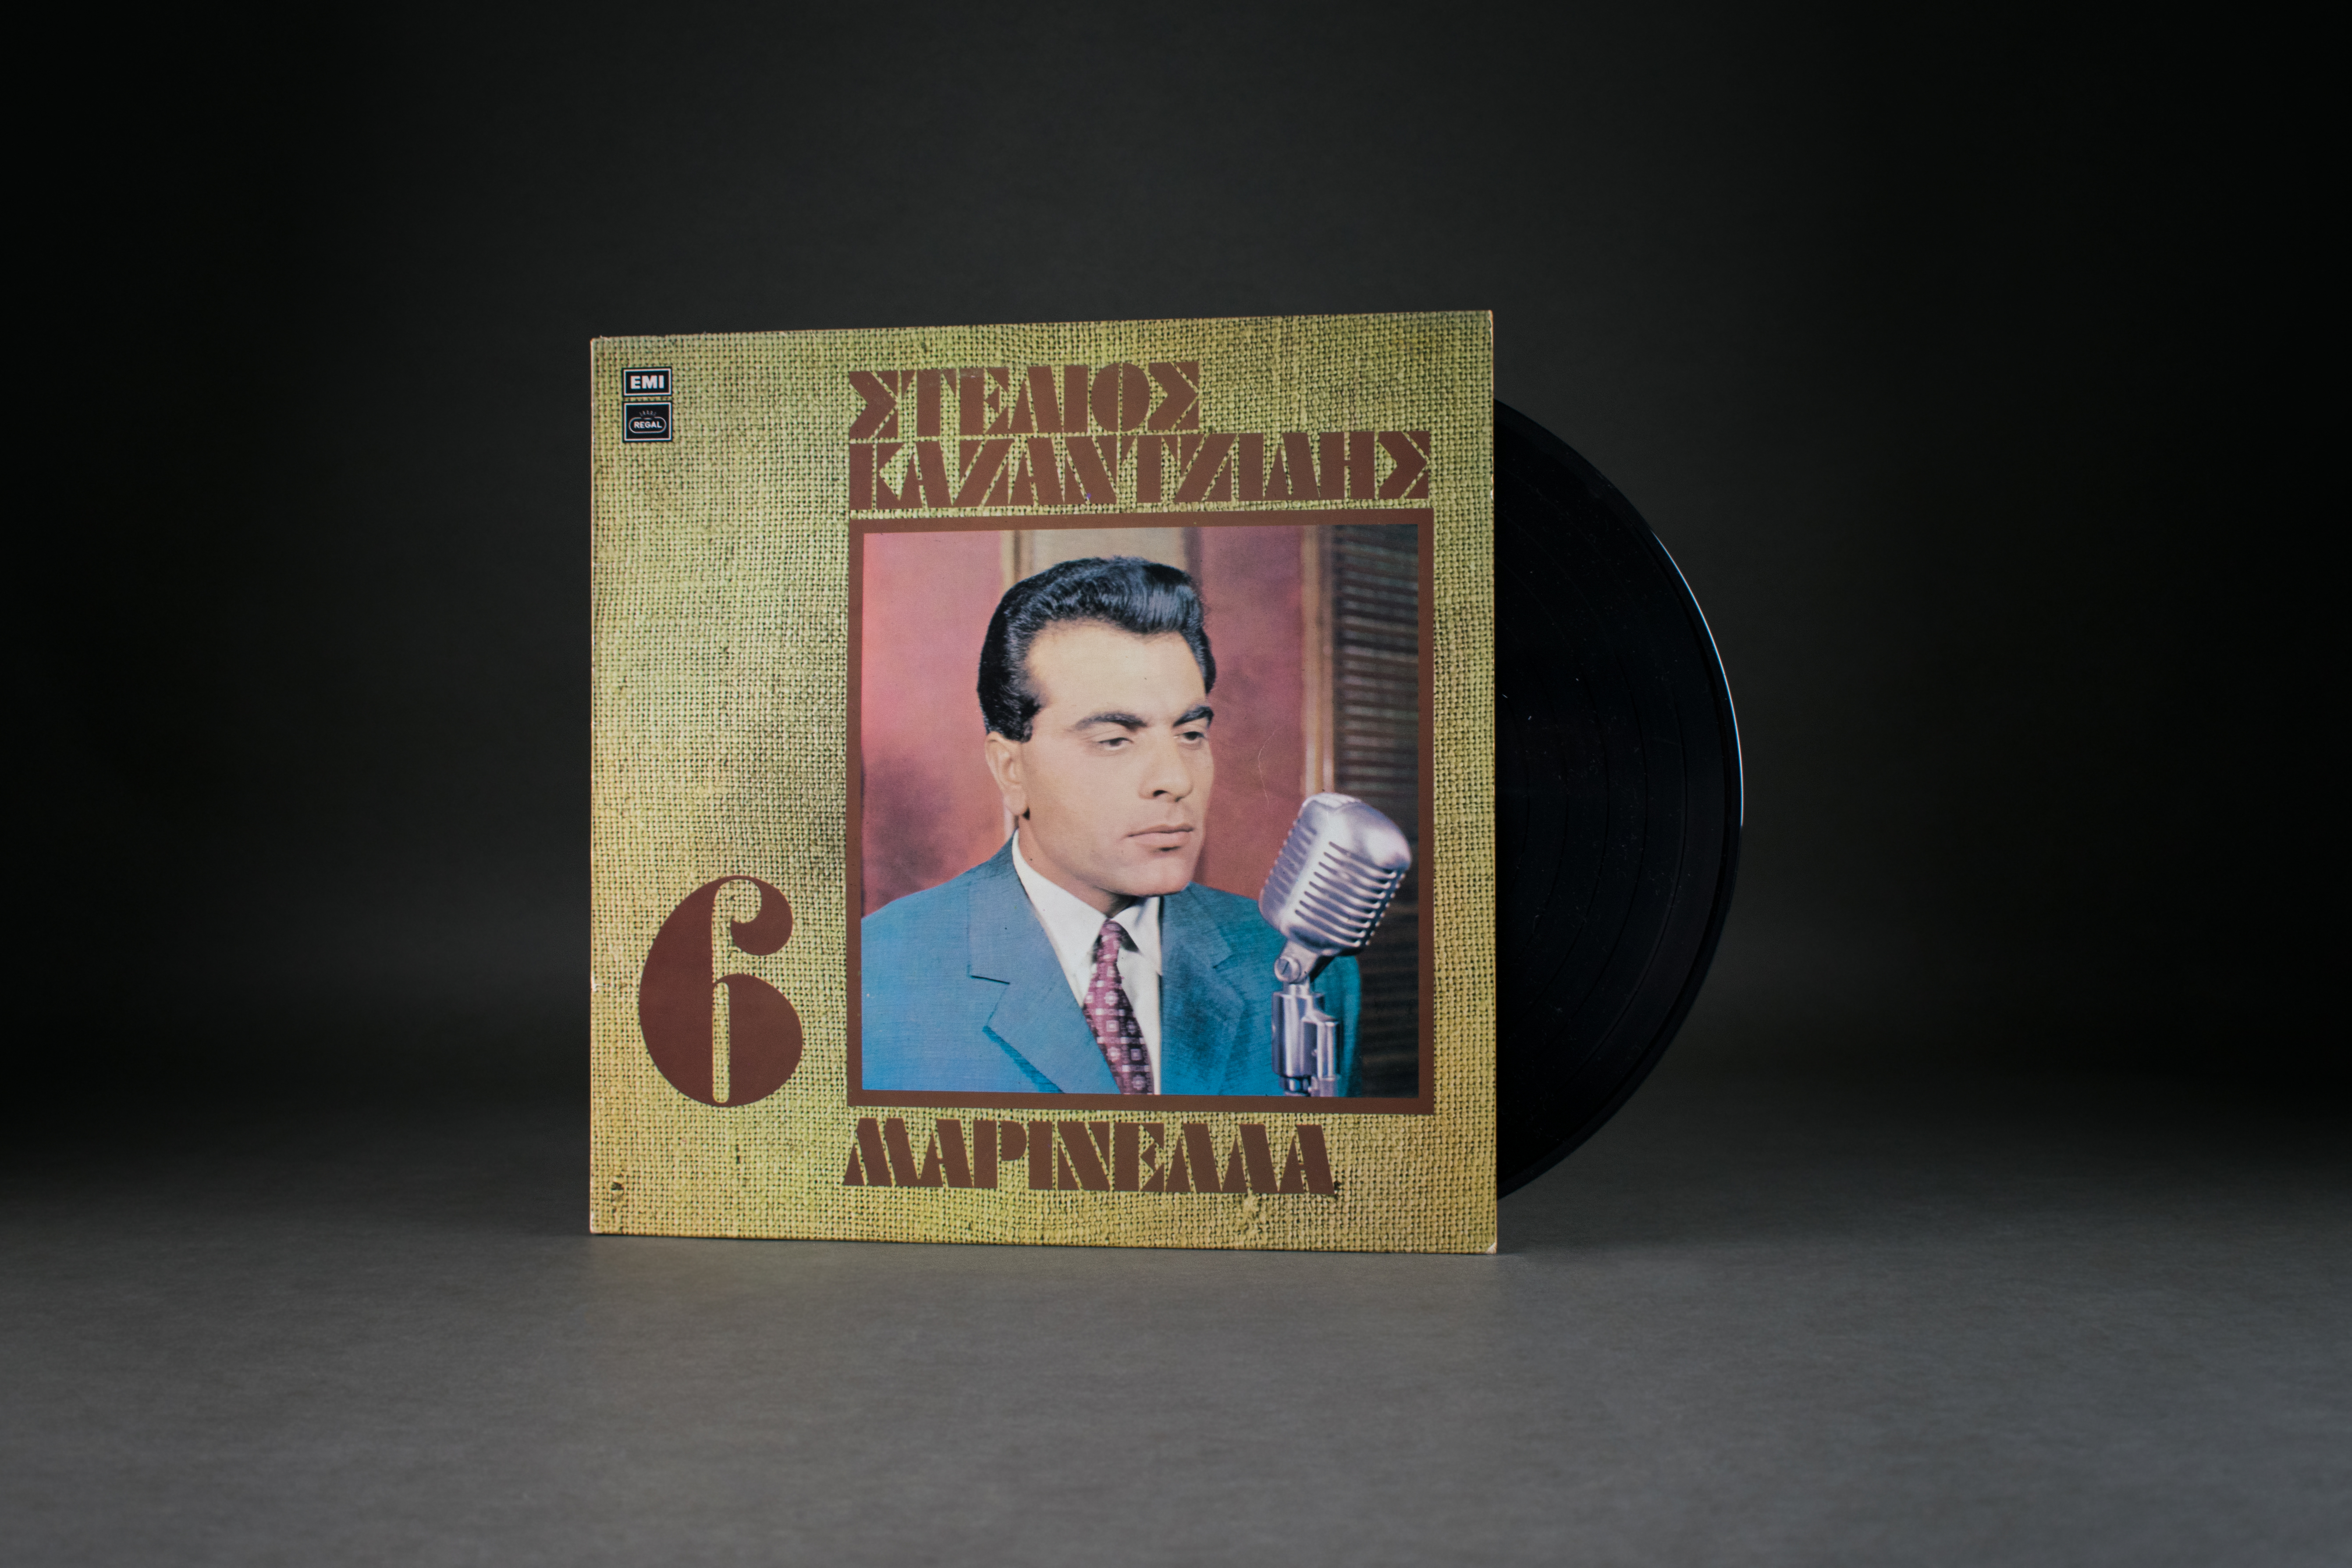 Long-playing record by Stelios Kazantzidis No.6., 1976. The Pontus-Greek singer Stelios Kazantzidis was one of the most popular singers among Greeks in Germany. In his songs he sang about homesickness, the longing for the abandoned homeland and gave a voice to the attitude towards life of the workers recruited from Greece. DOMiD Archive, Cologne, E 1473.0471